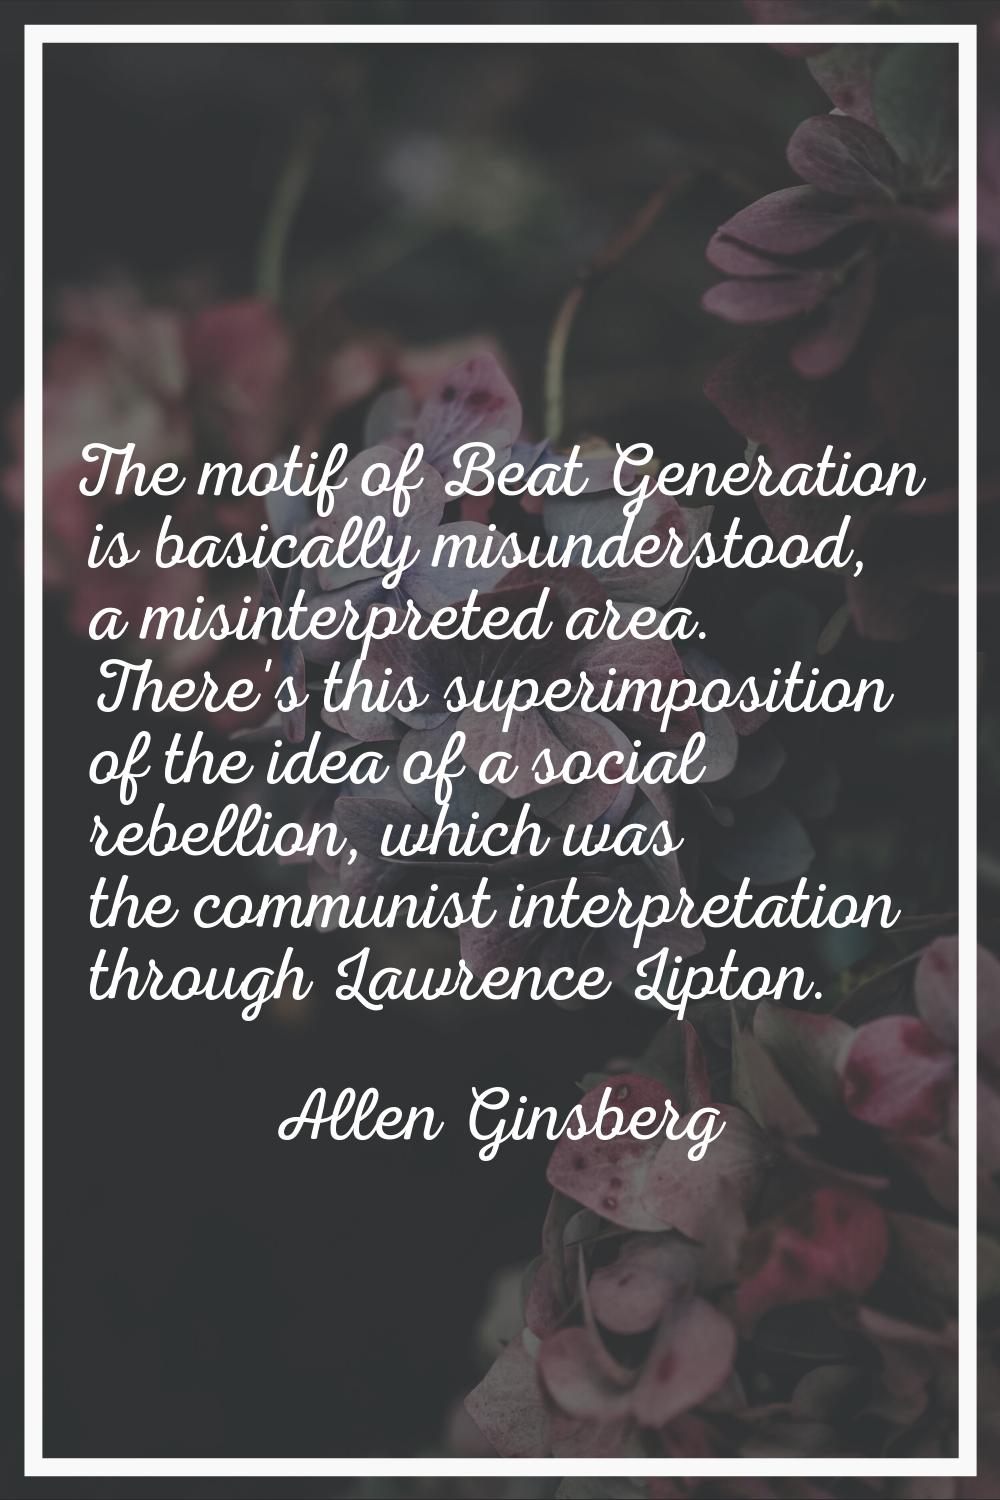 The motif of Beat Generation is basically misunderstood, a misinterpreted area. There's this superi